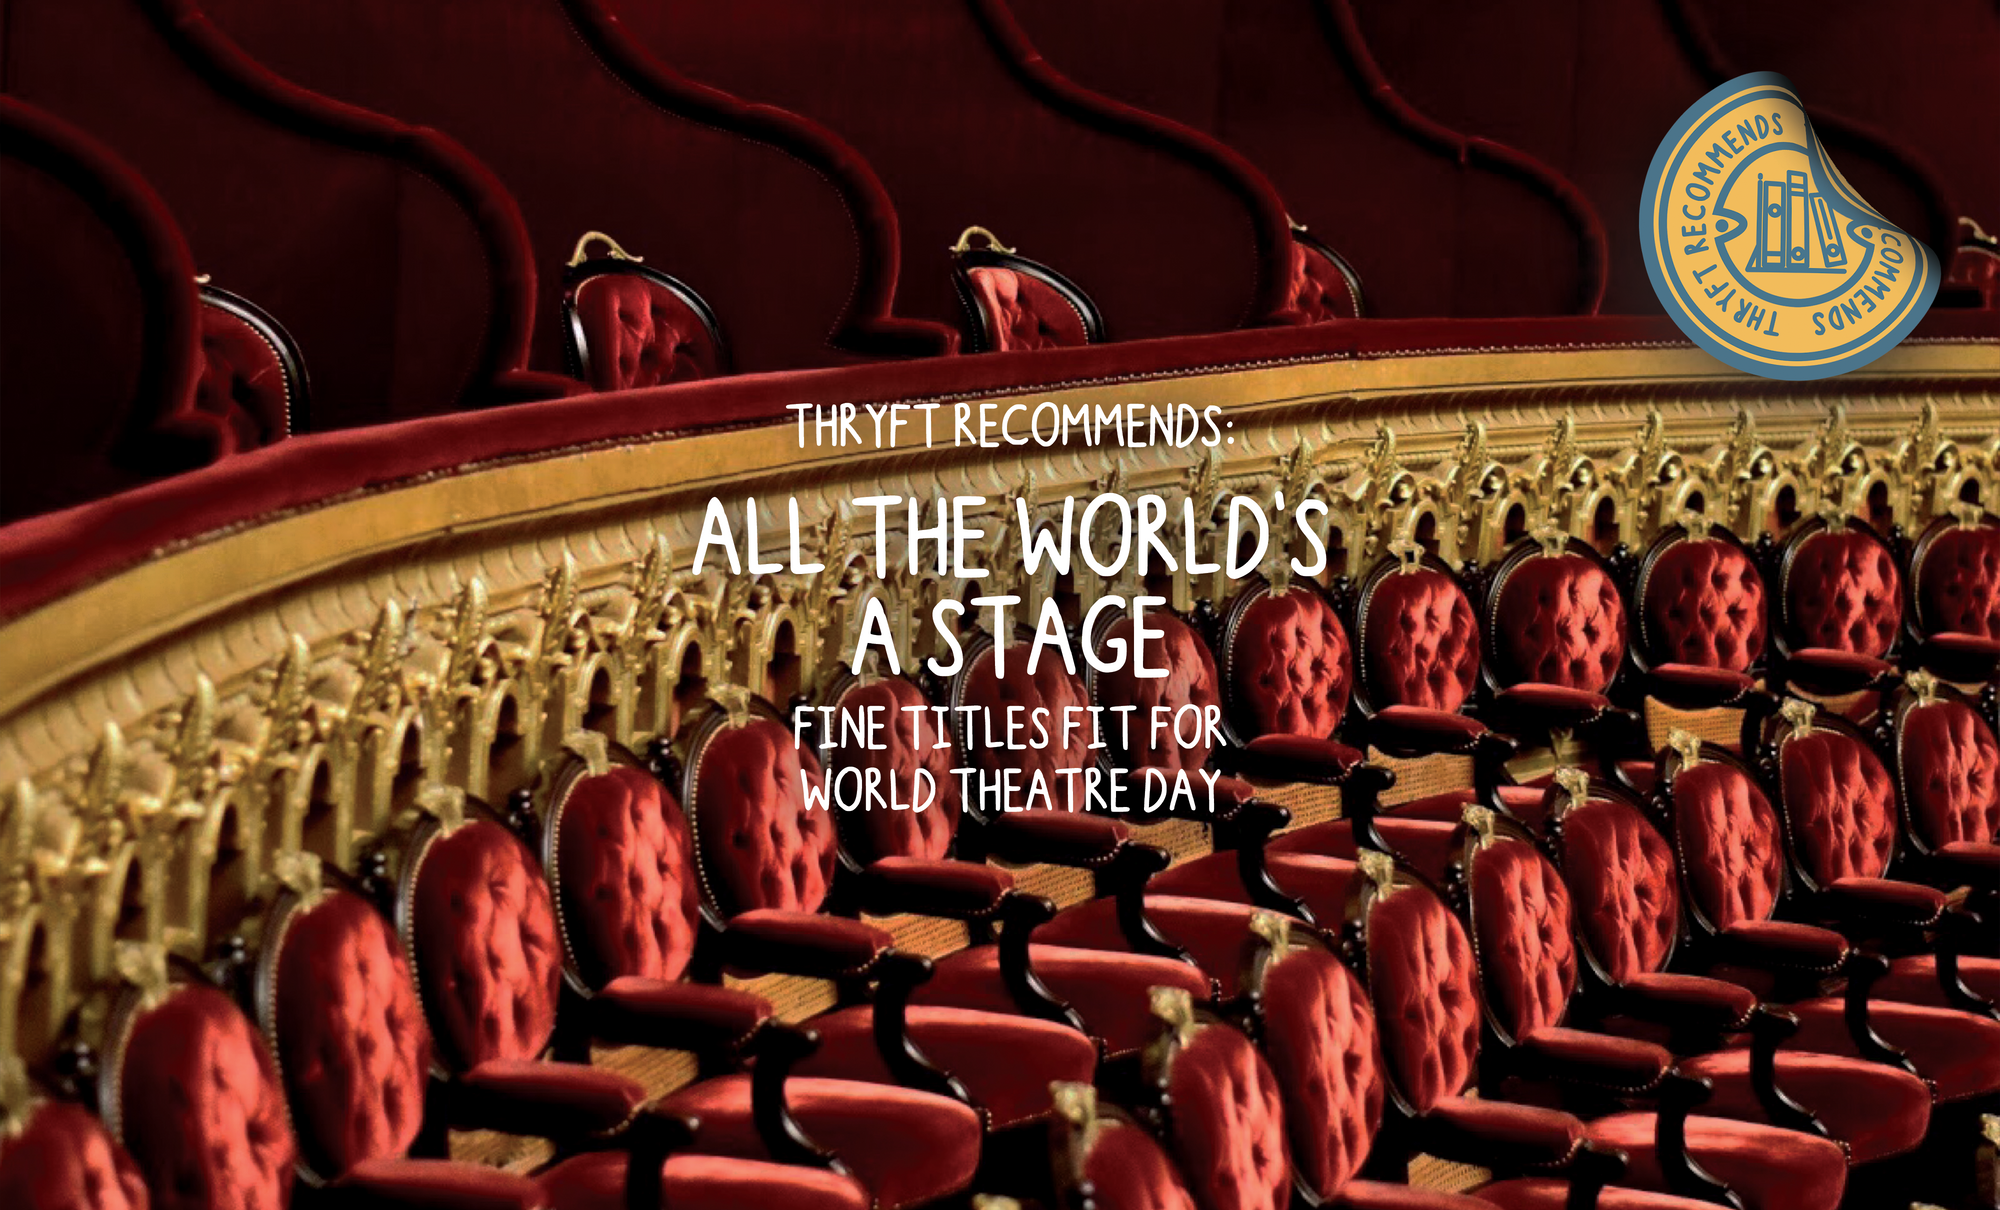 All the World's a Stage: Fine Titles Fit for World Theatre Day